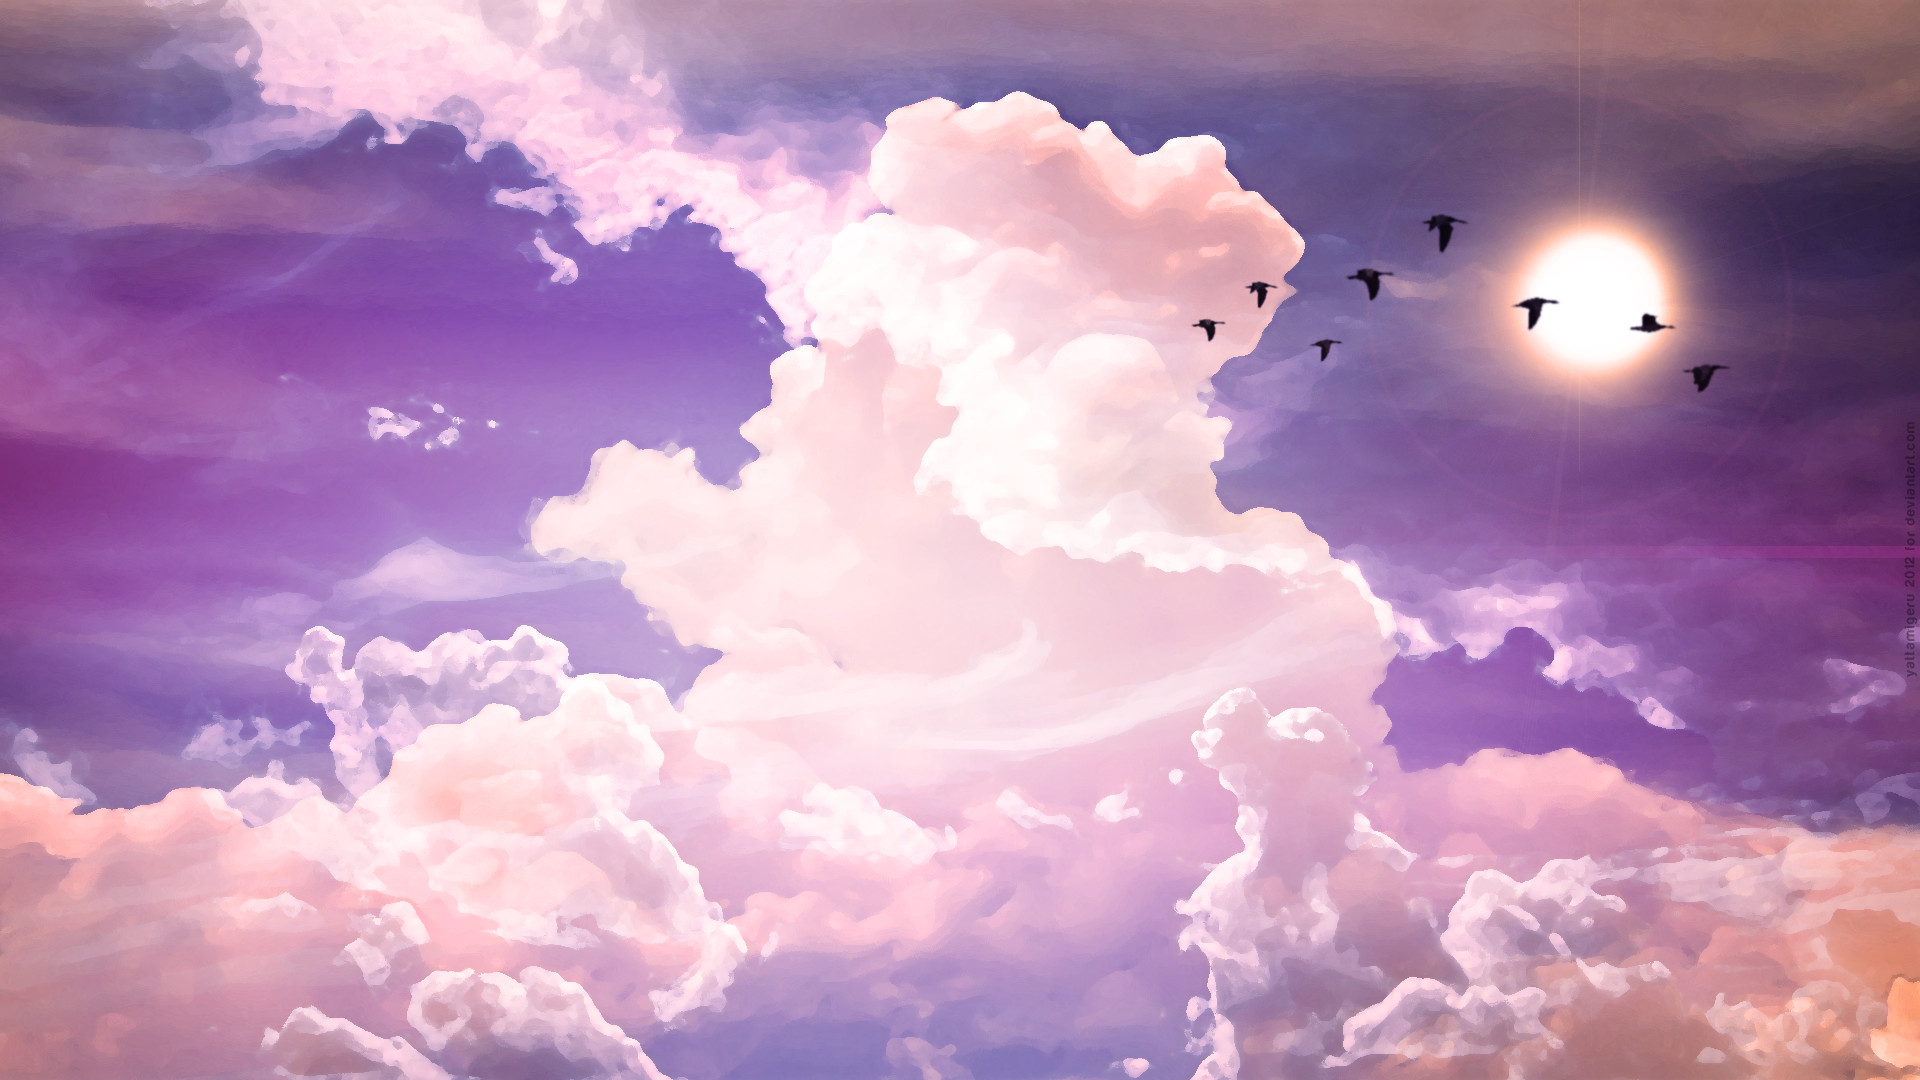 1920x1080 wallpapers for pretty purple backgrounds tumblr | Download .